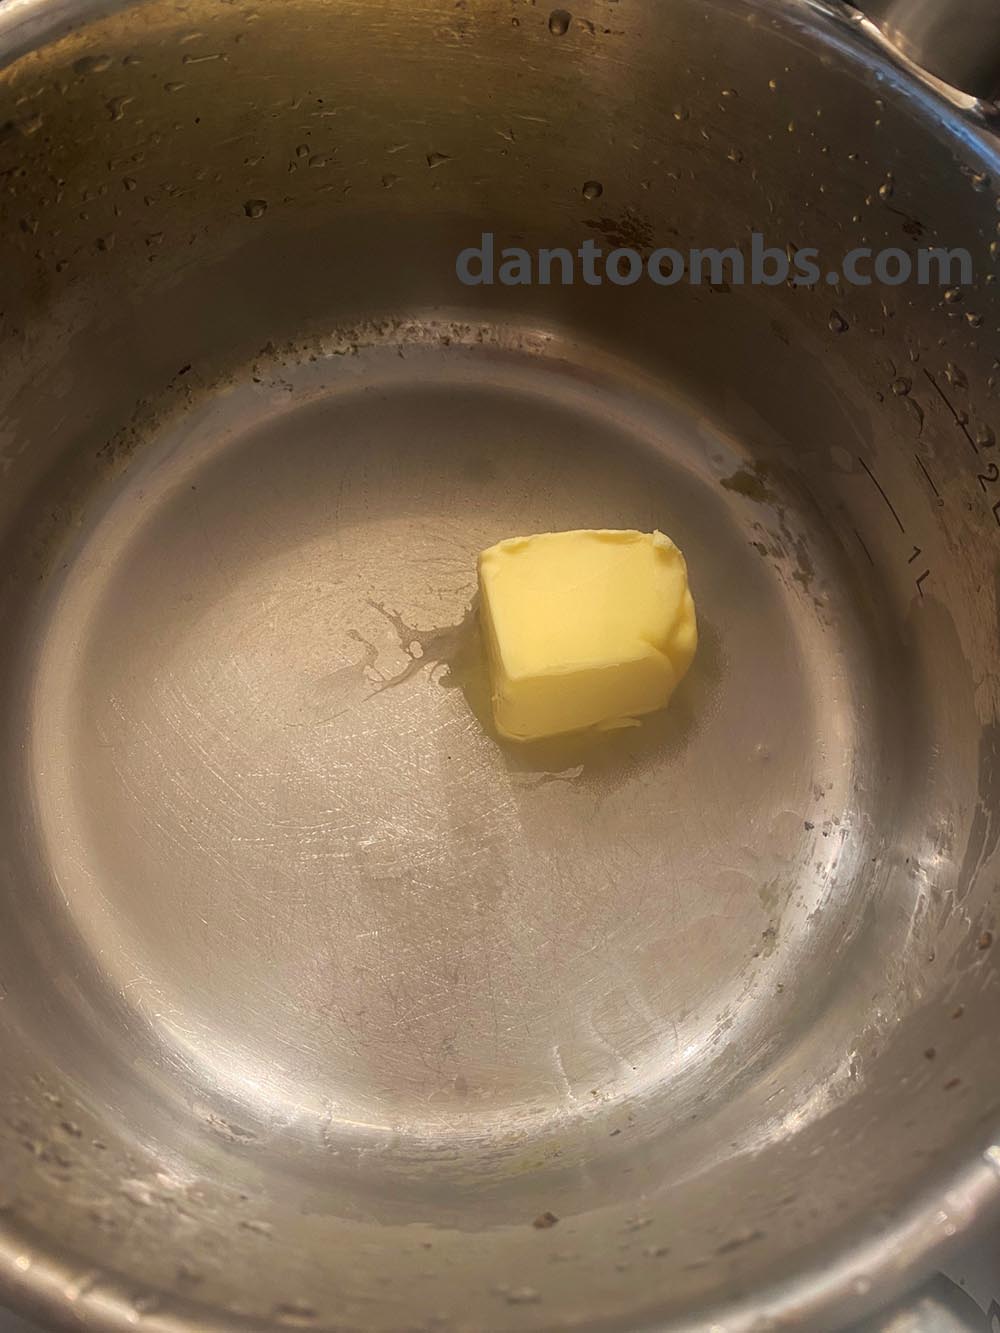 Melting butter in pan